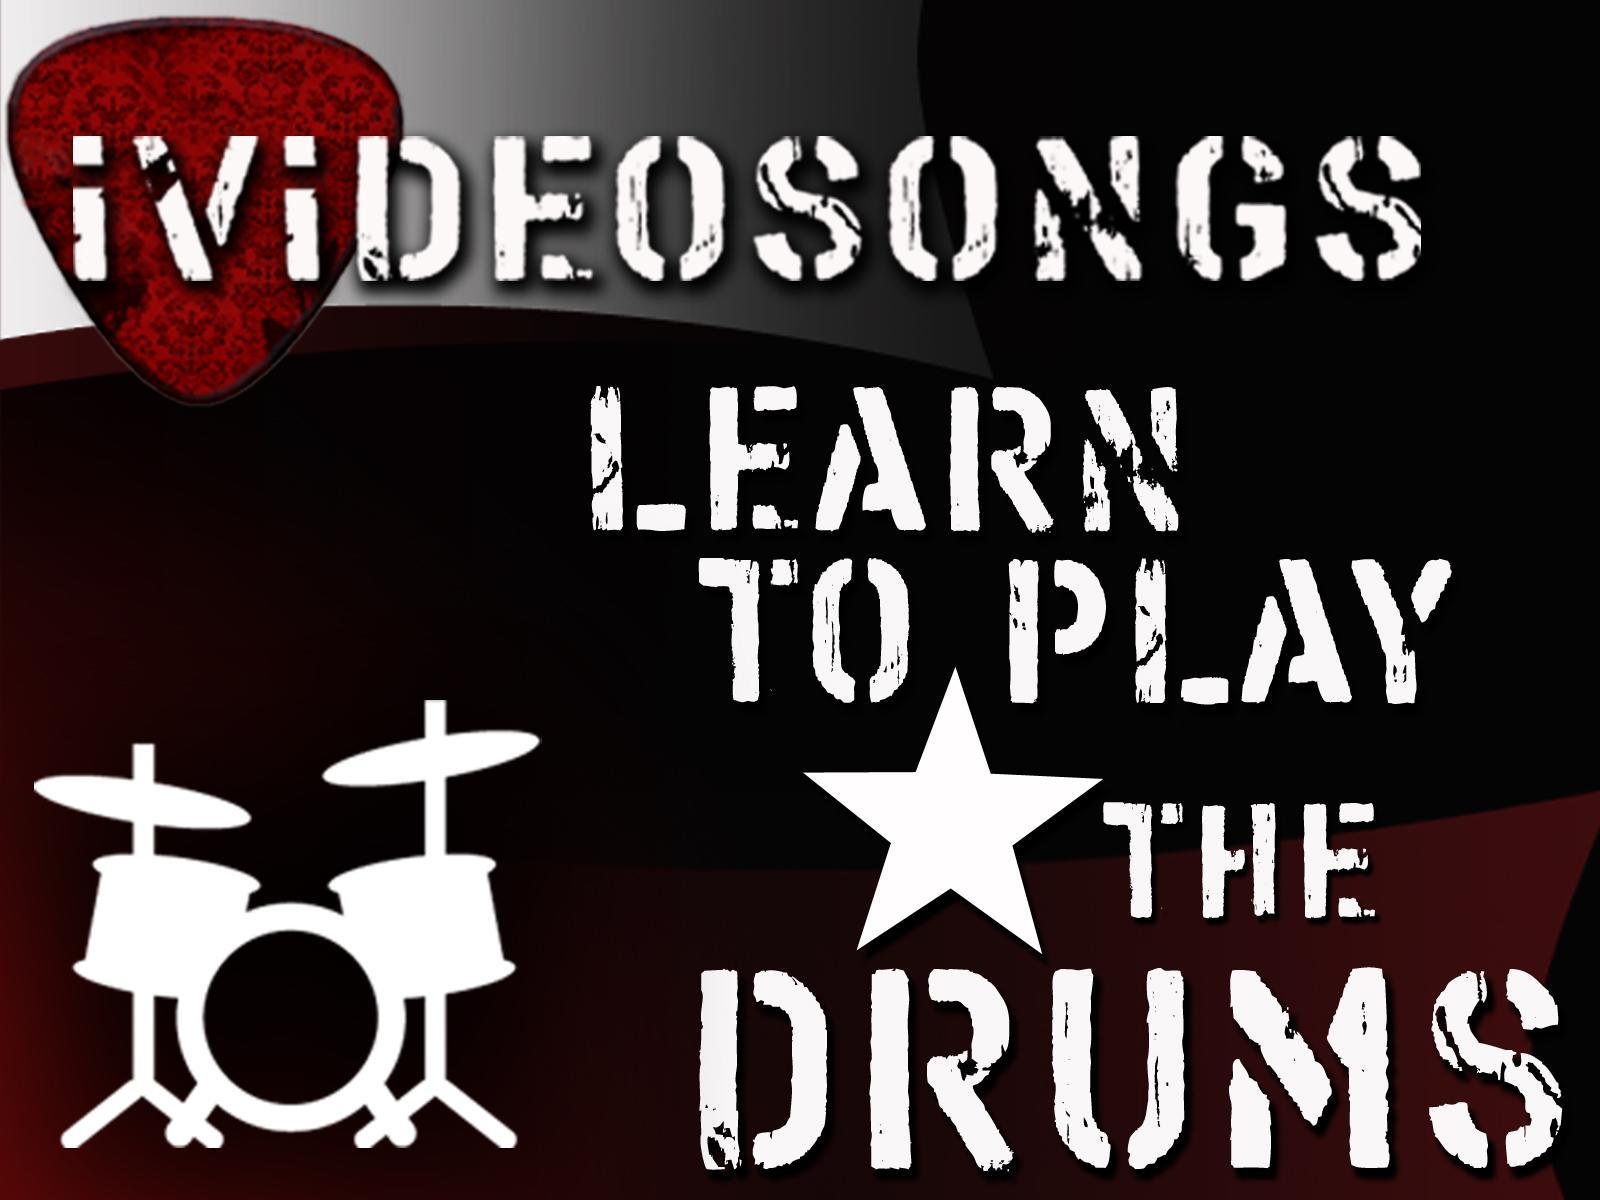 Watch how to play the drums volume prime video